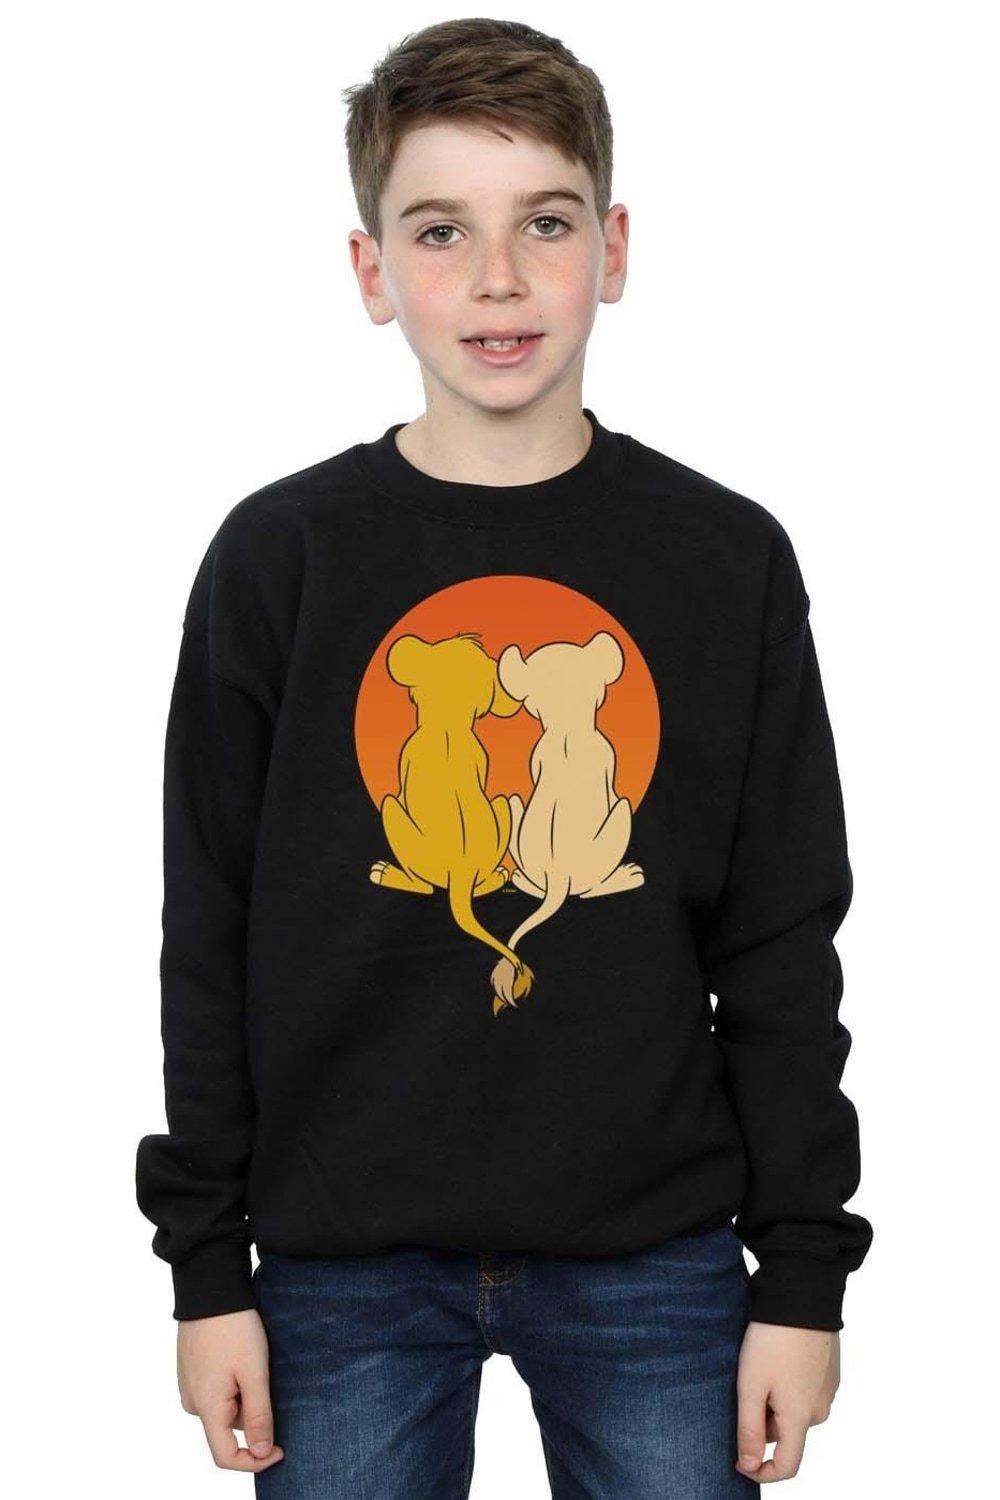 The Lion King We Are One Sweatshirt